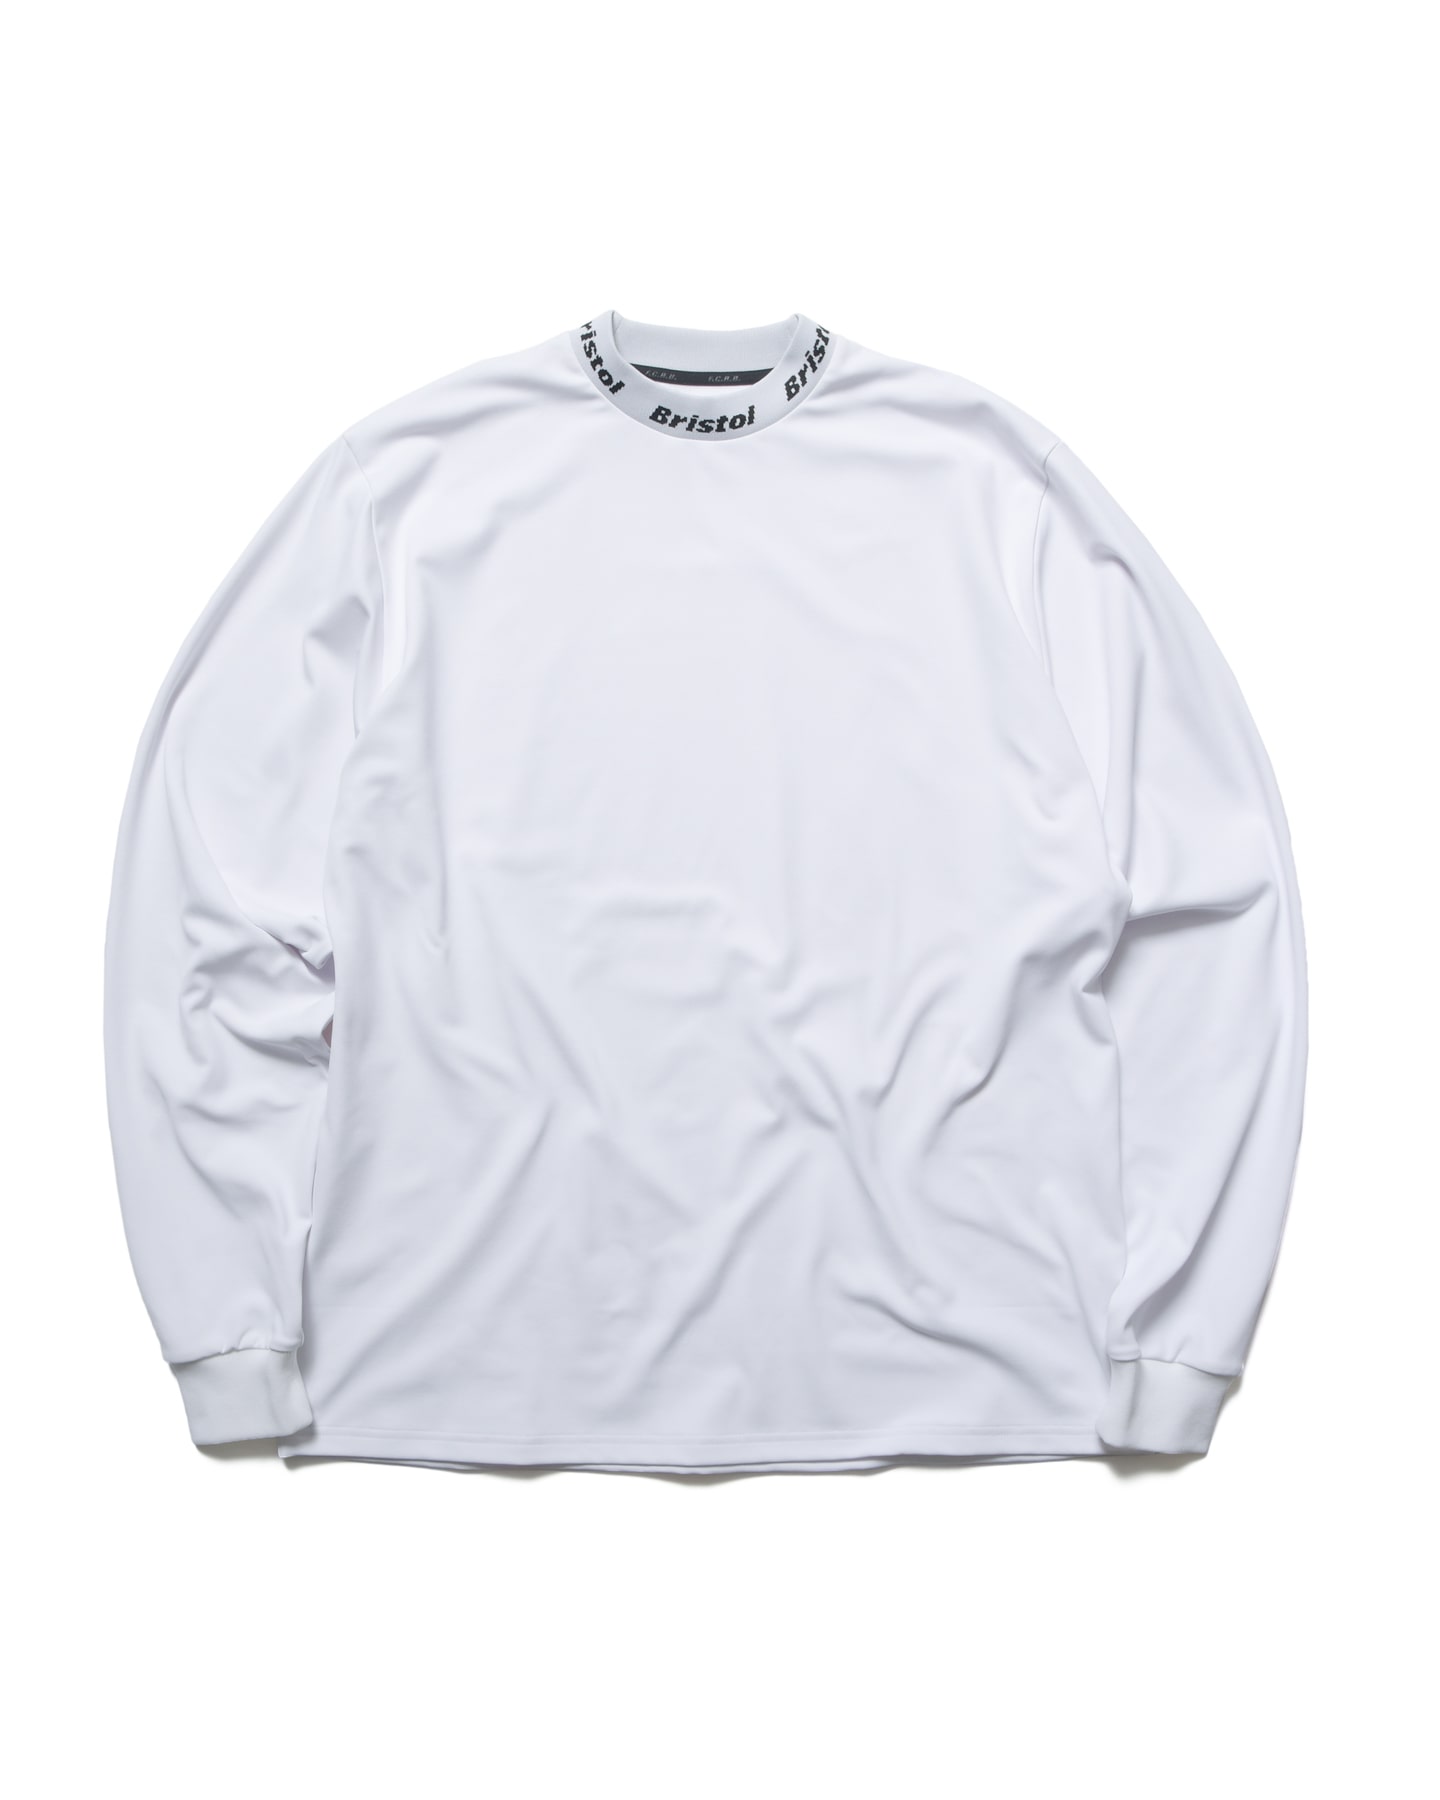 SOPH. | WINDPROOF NECK LOGO L/S BAGGY TOP(XL WHITE):